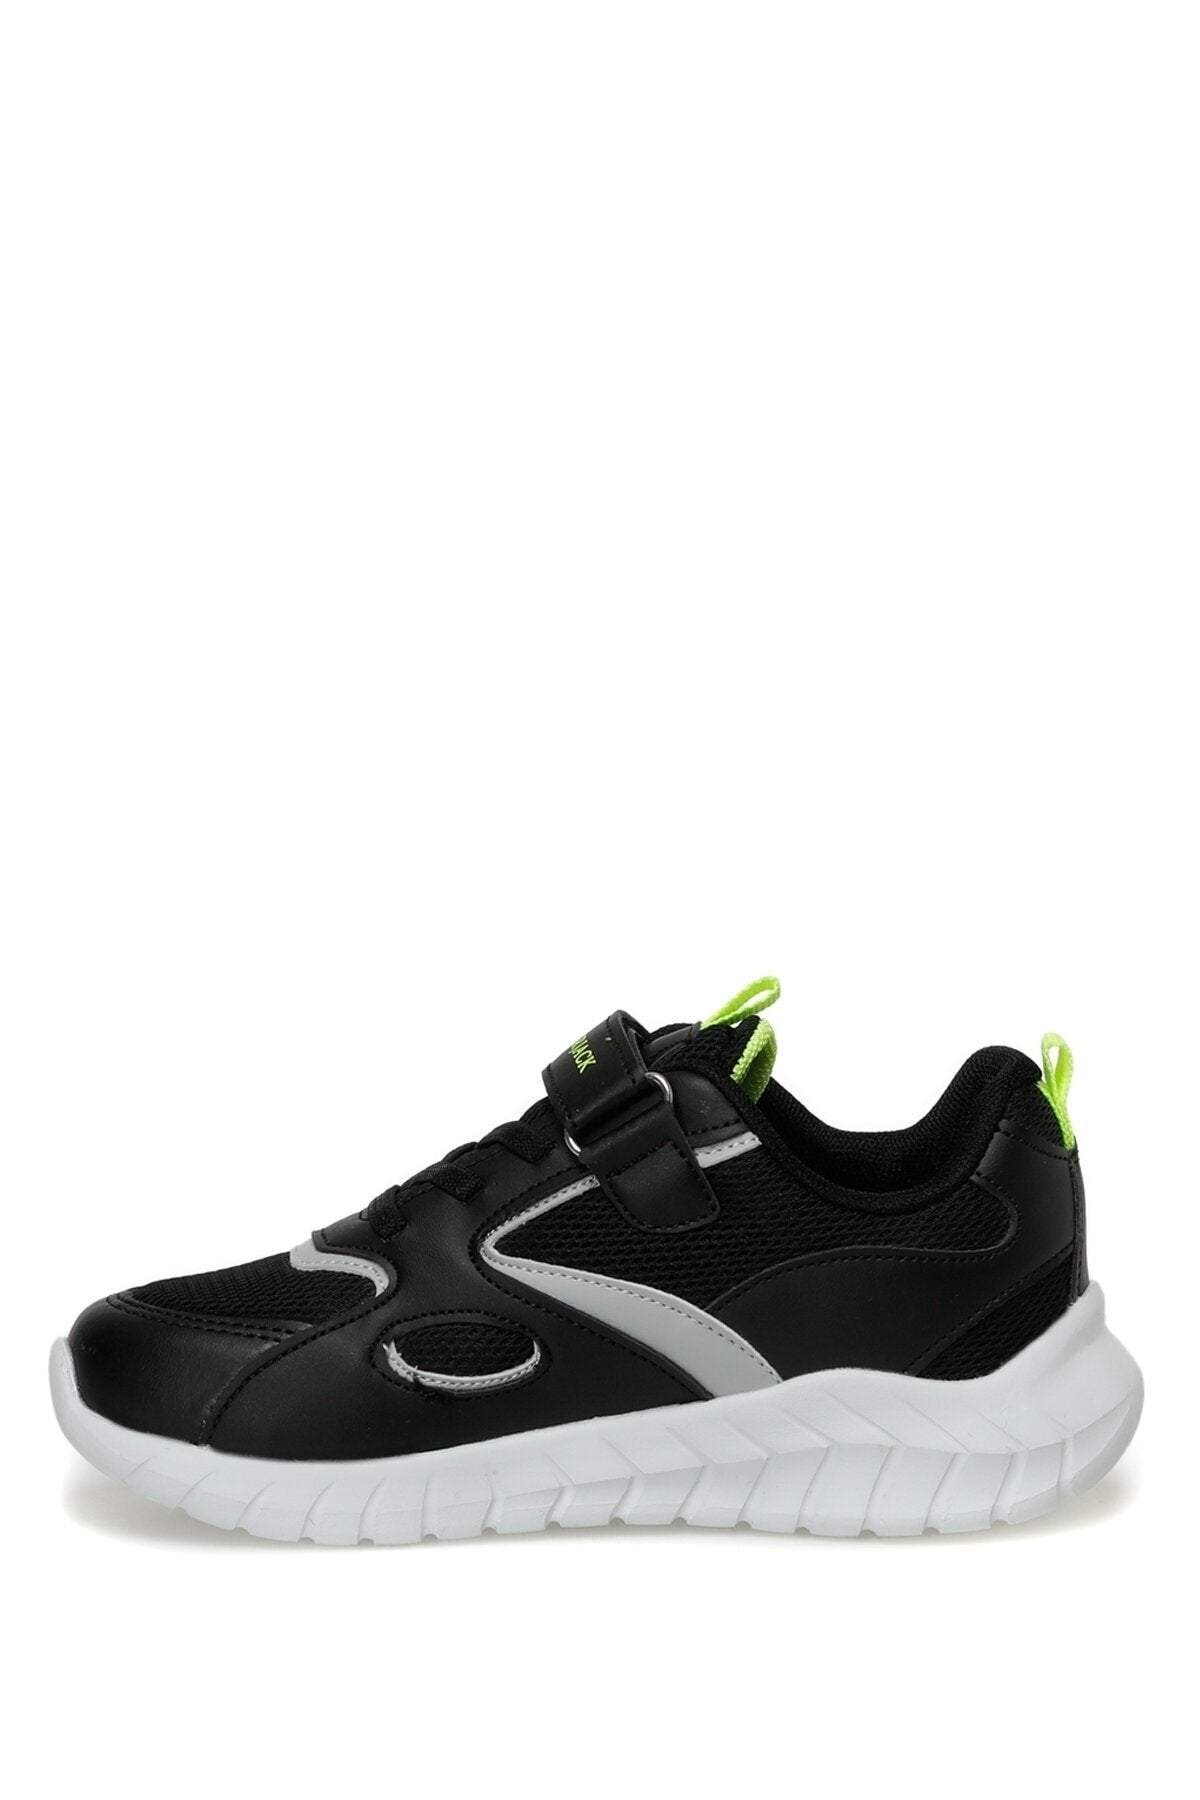 Cable Xl 3fx Black Boys Running Shoes